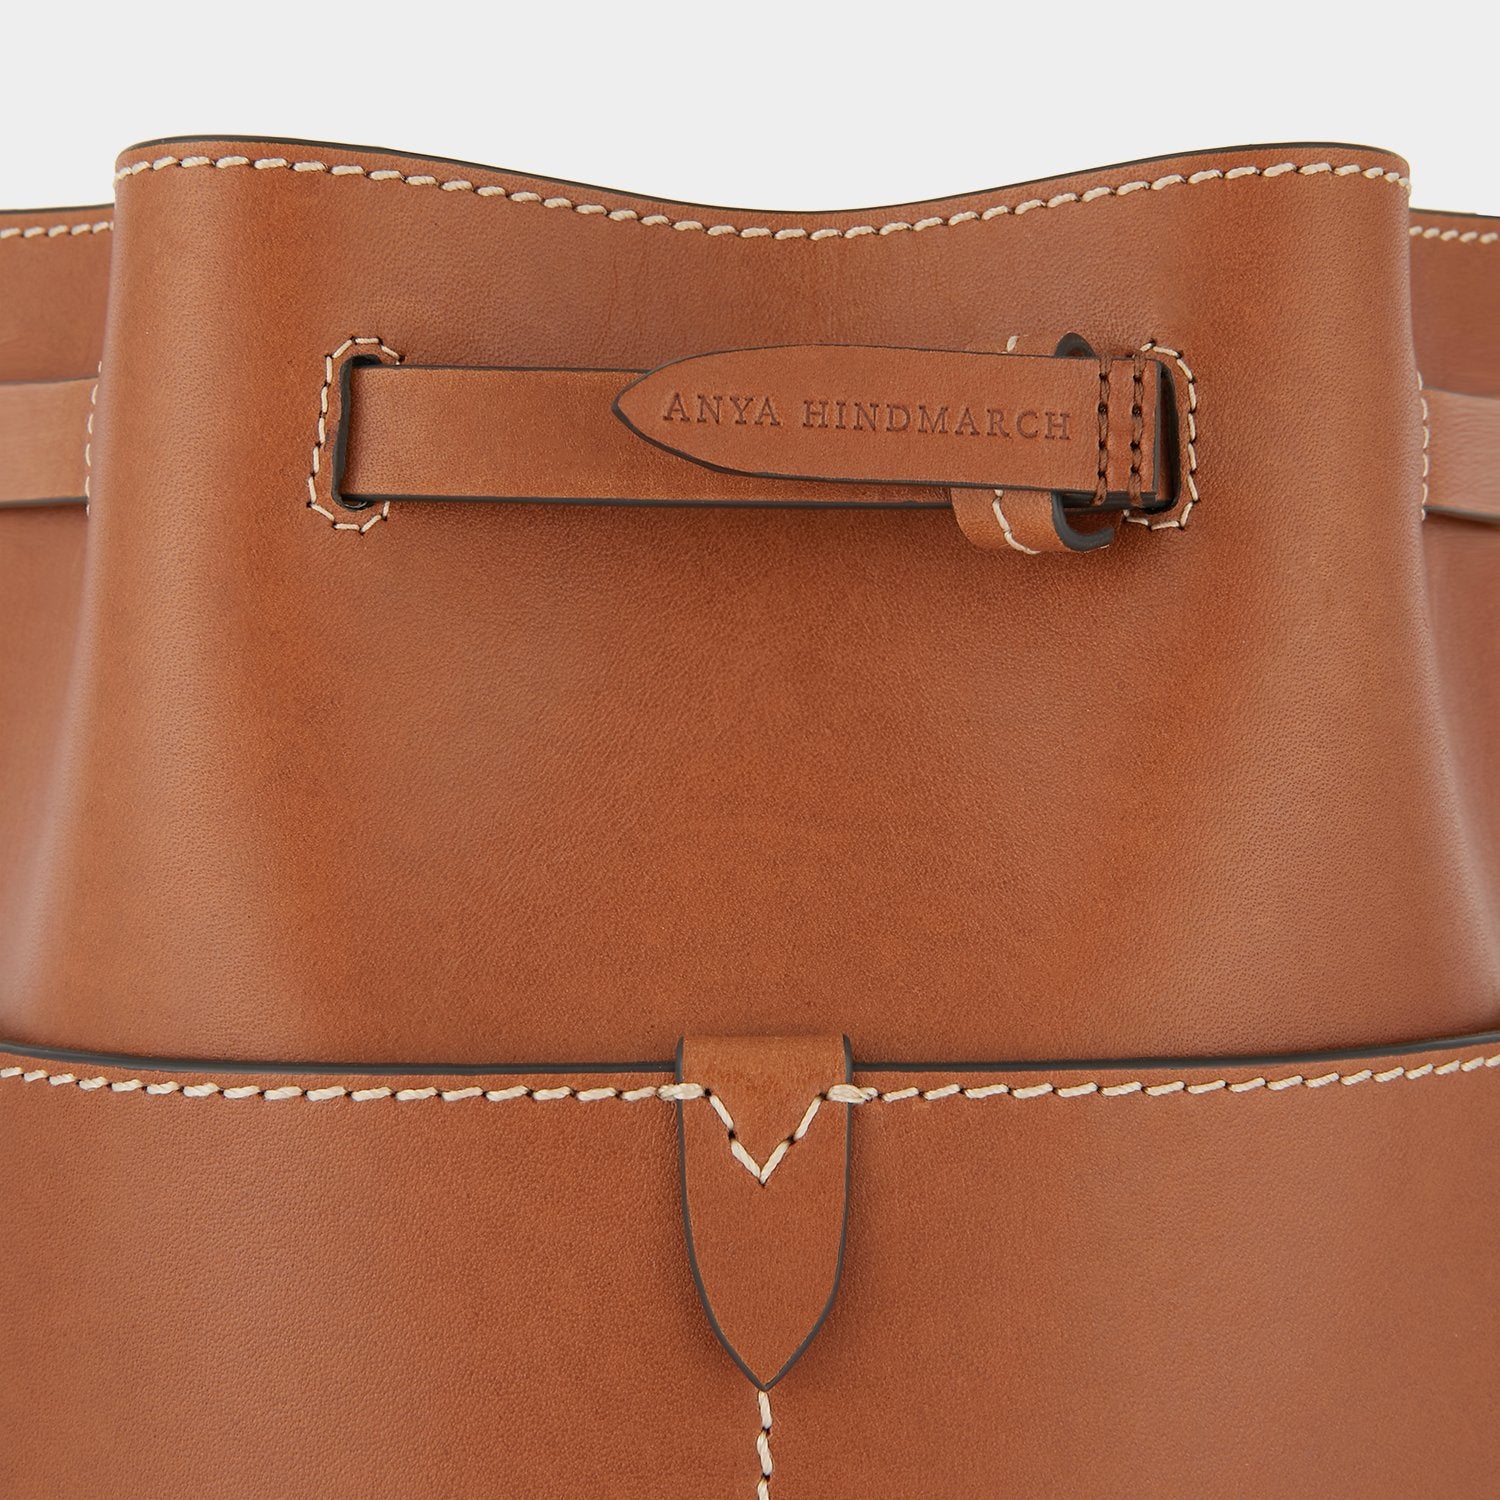 Return to Nature Small Bucket Bag -

                  
                    Compostable Leather in Tan -
                  

                  Anya Hindmarch UK
